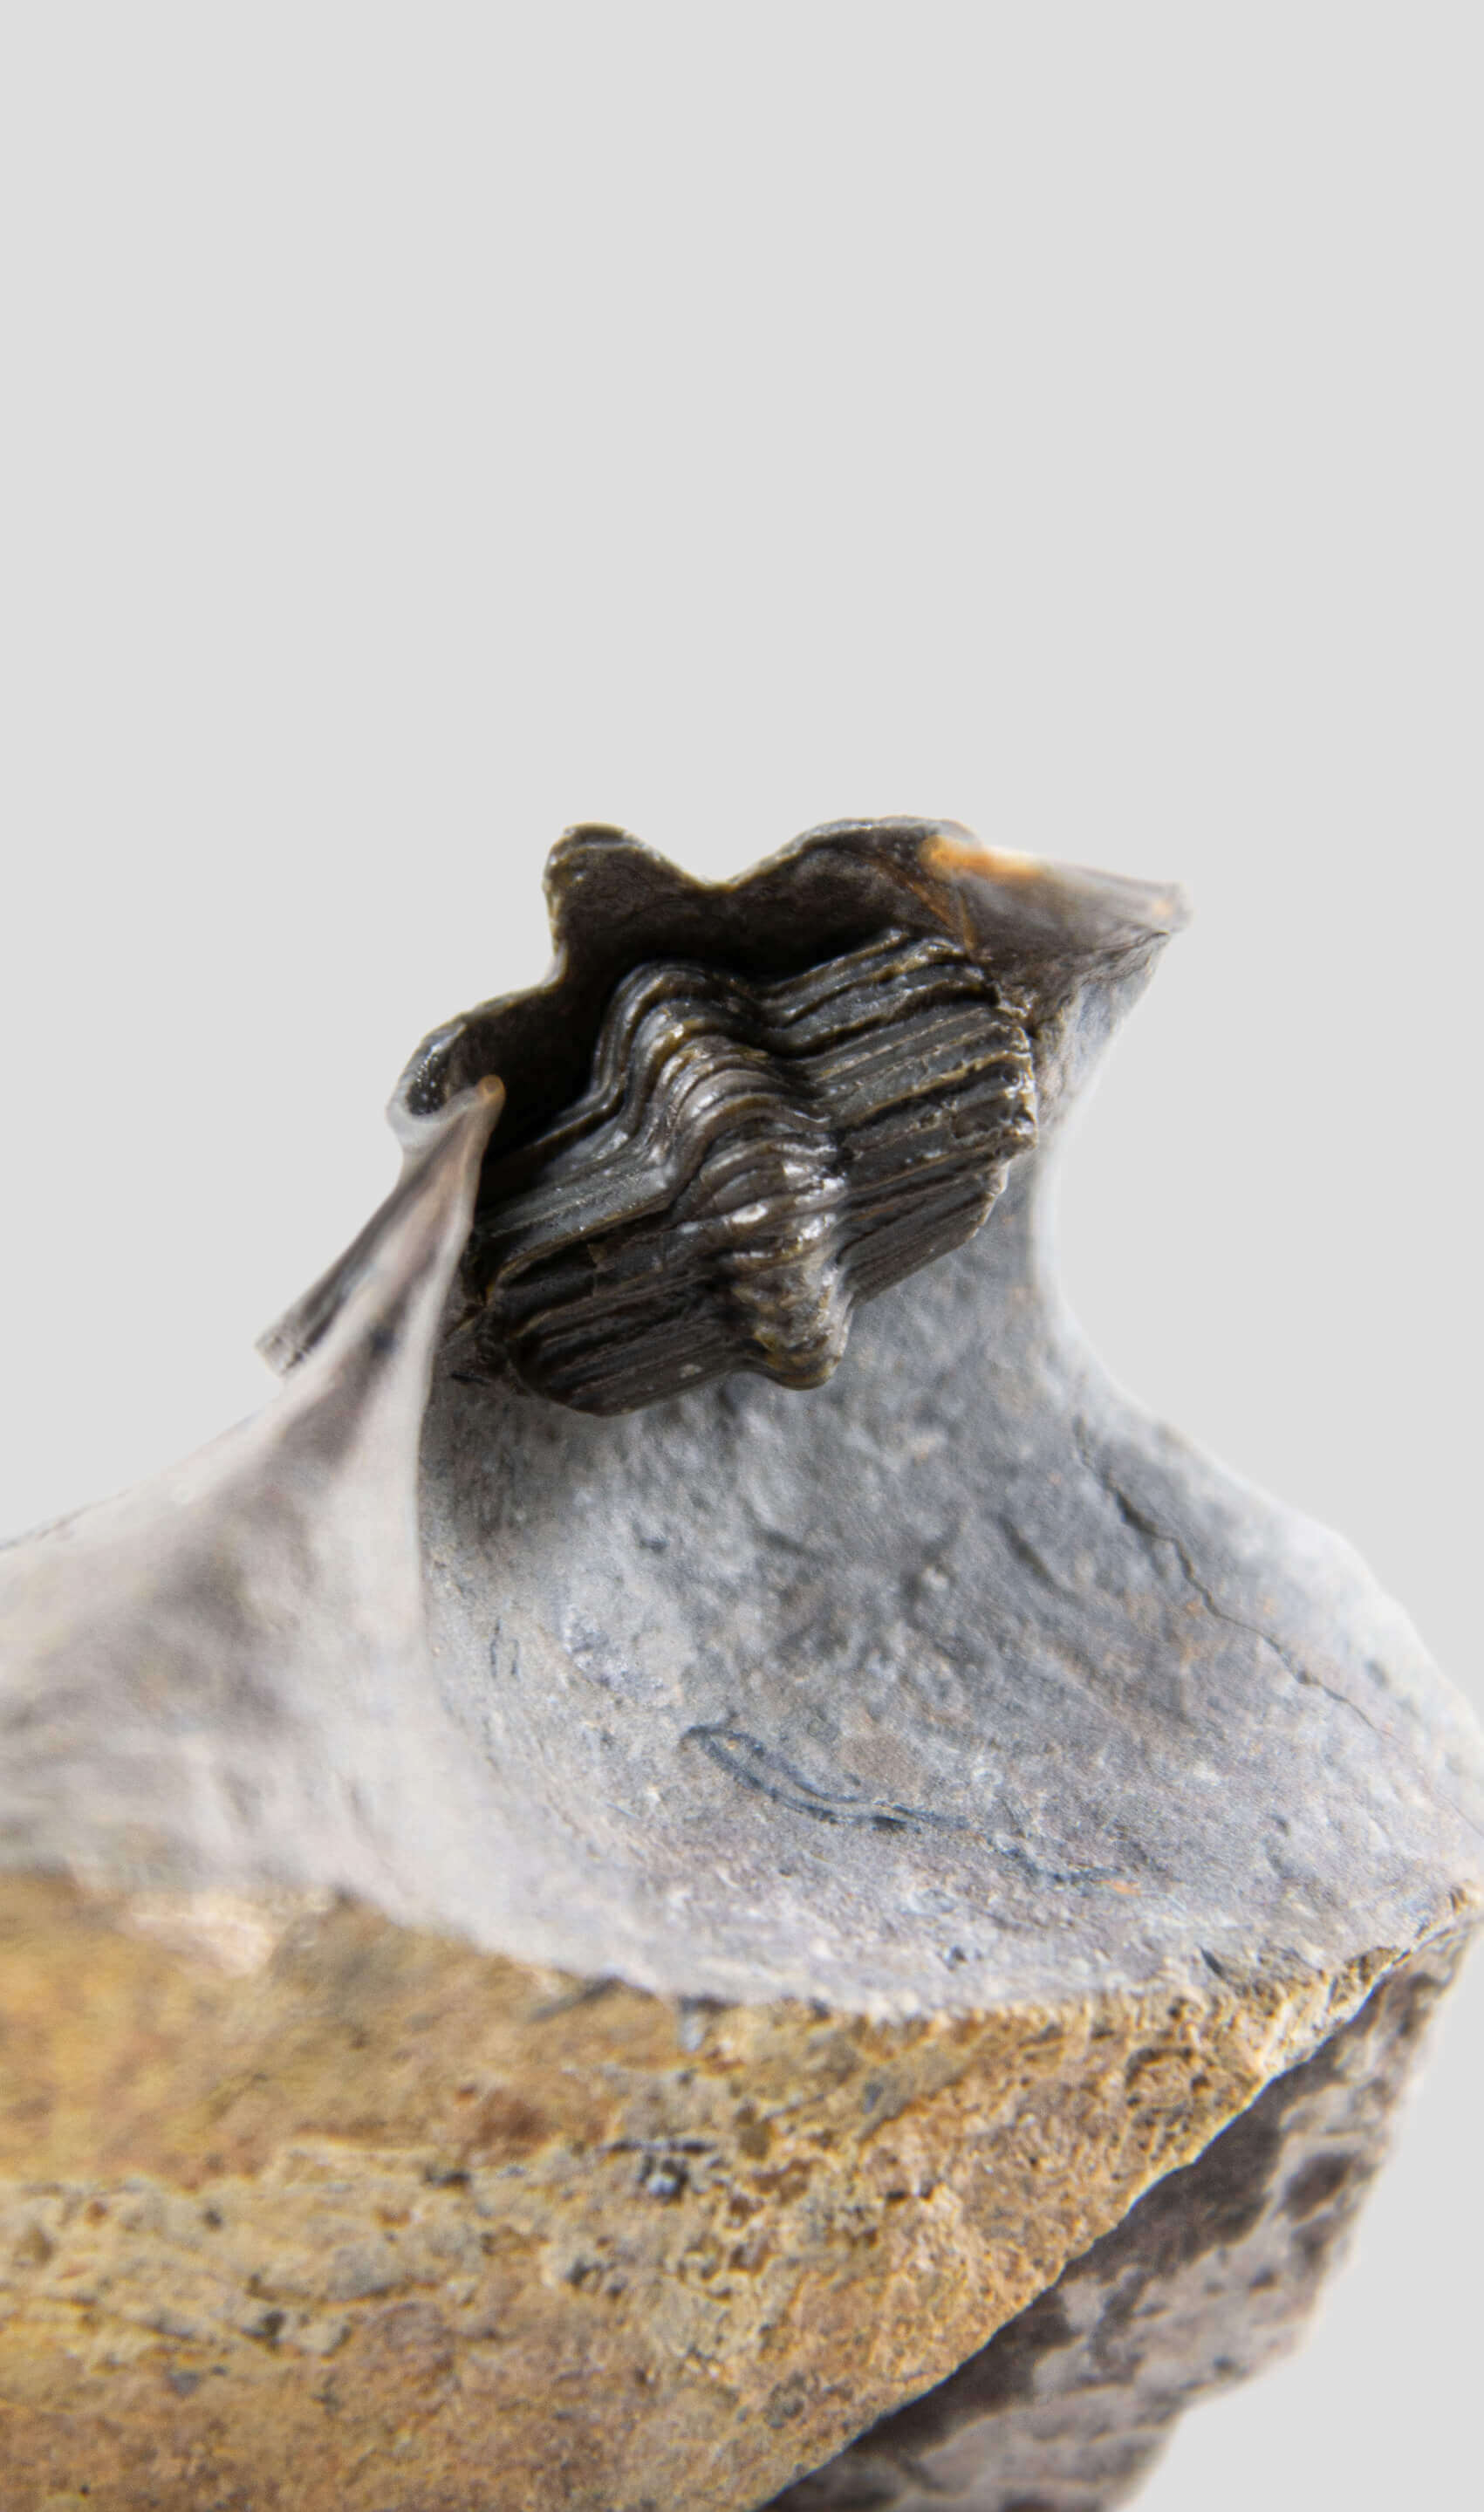 A stunning quality Harpes trilobite fossil specimen and you can buy a harpes trilobites for sale 19